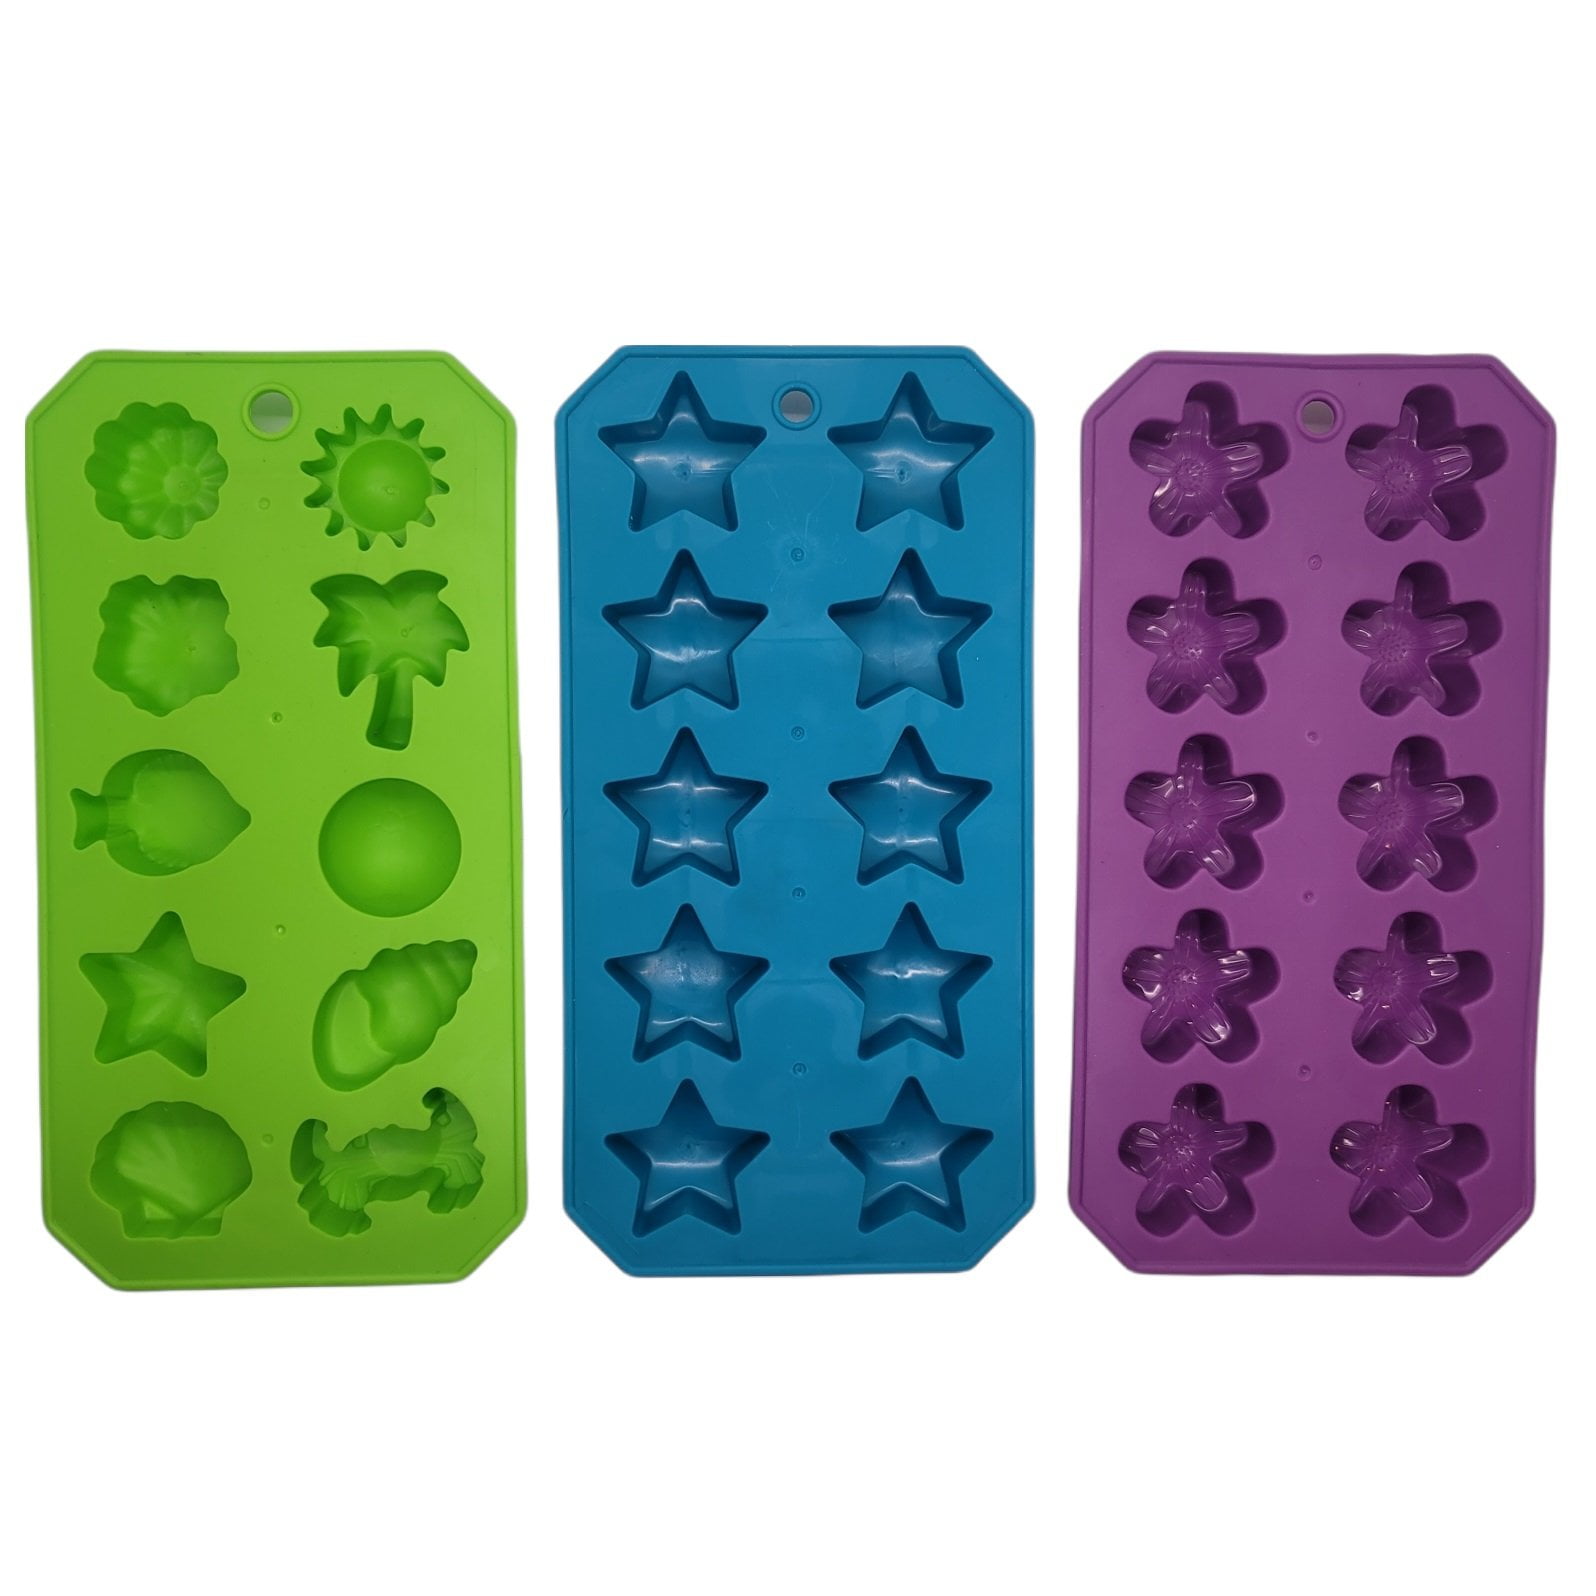 black silicone spider web ice cube tray mold makes 10 cubes brand new Halloween 